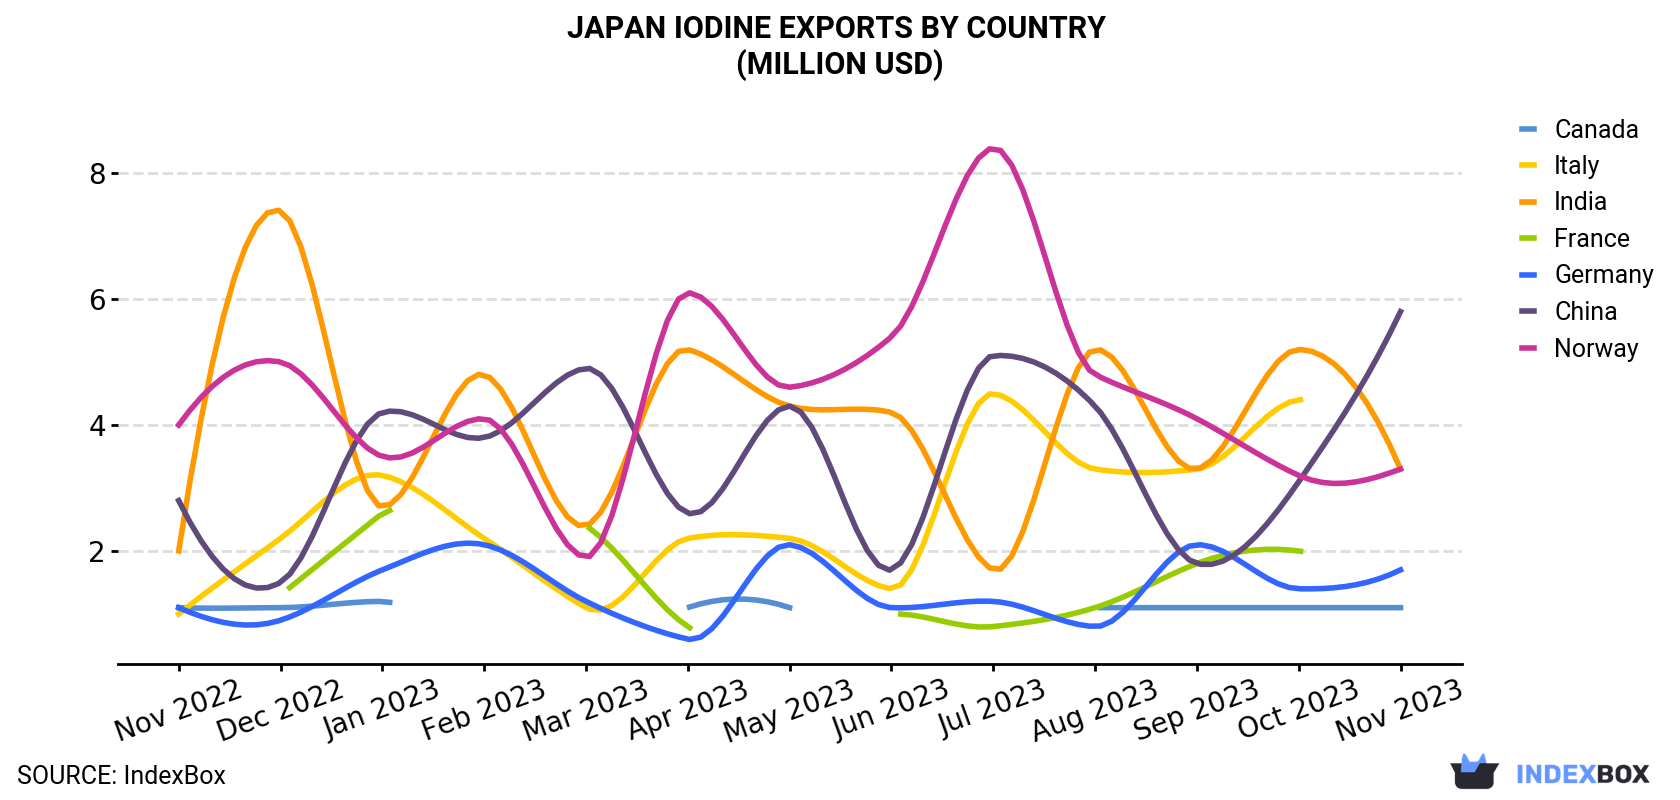 Japan Iodine Exports By Country (Million USD)